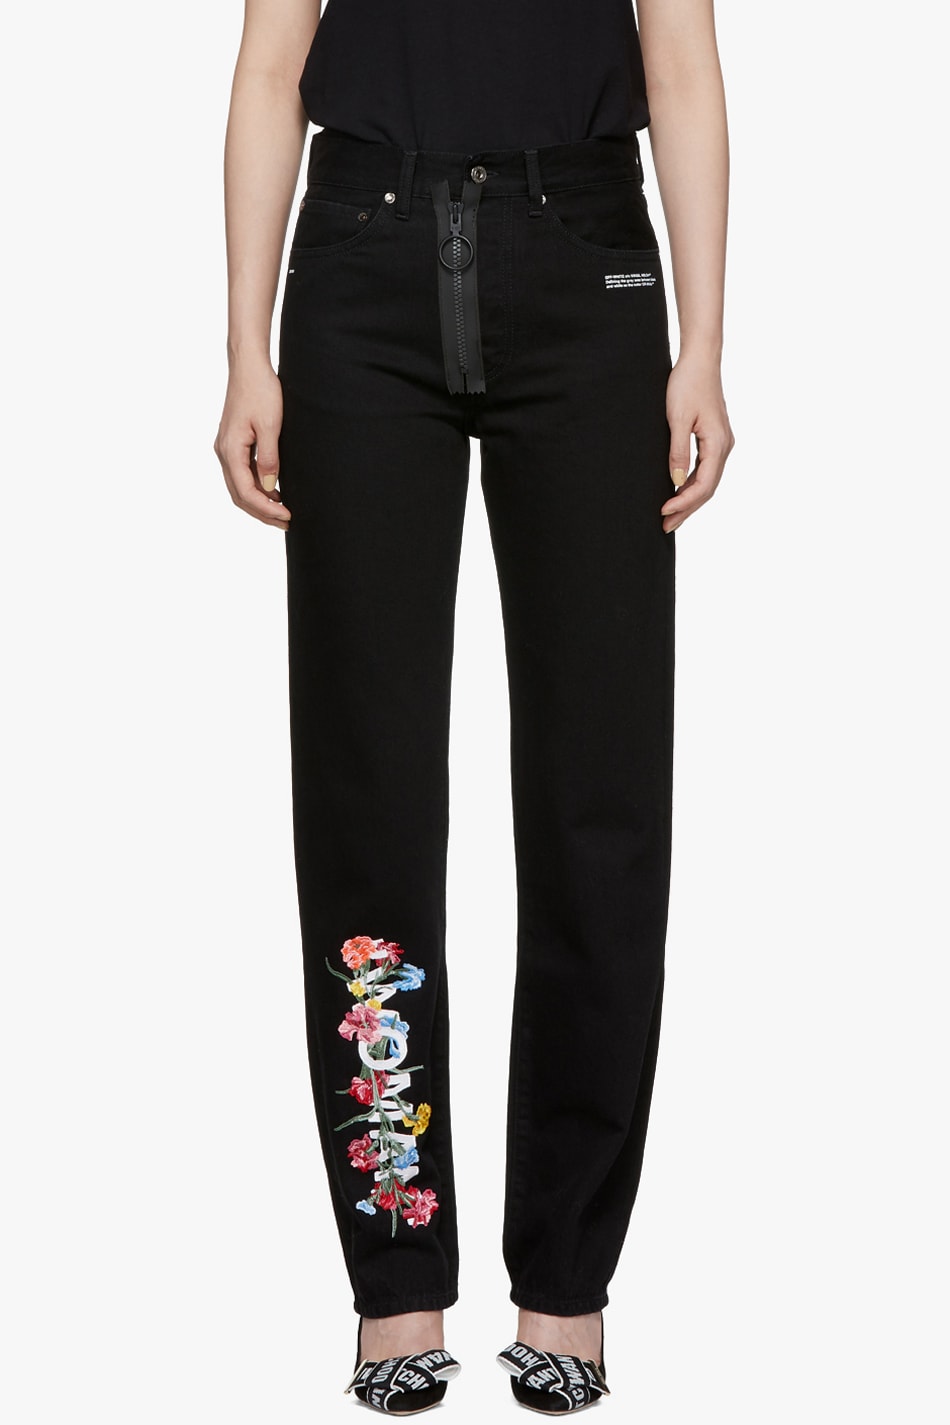 Off-White Vintage Flowers Baggy Jeans Black